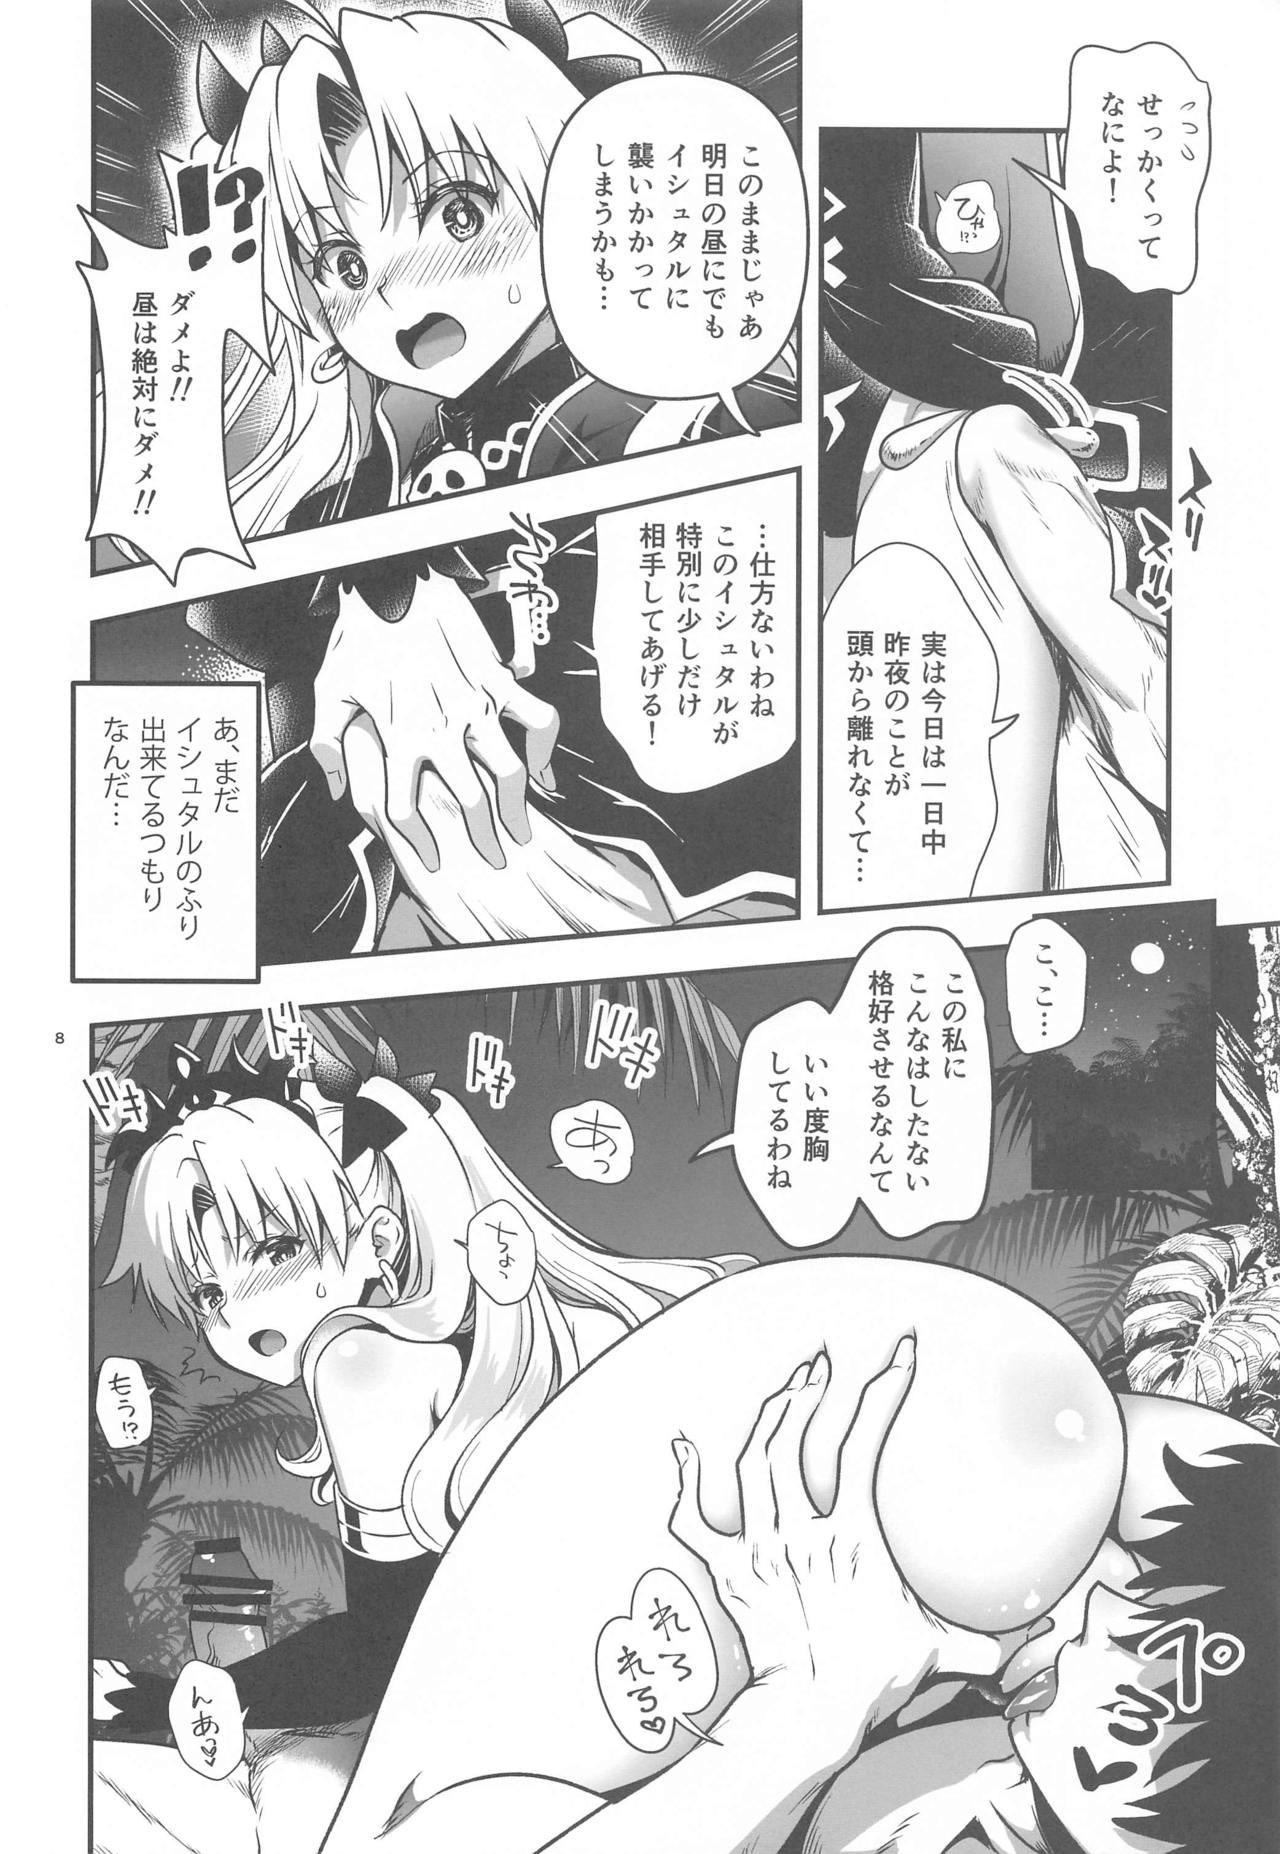 Time All Night Romance 2 - Fate grand order Egypt - Page 7